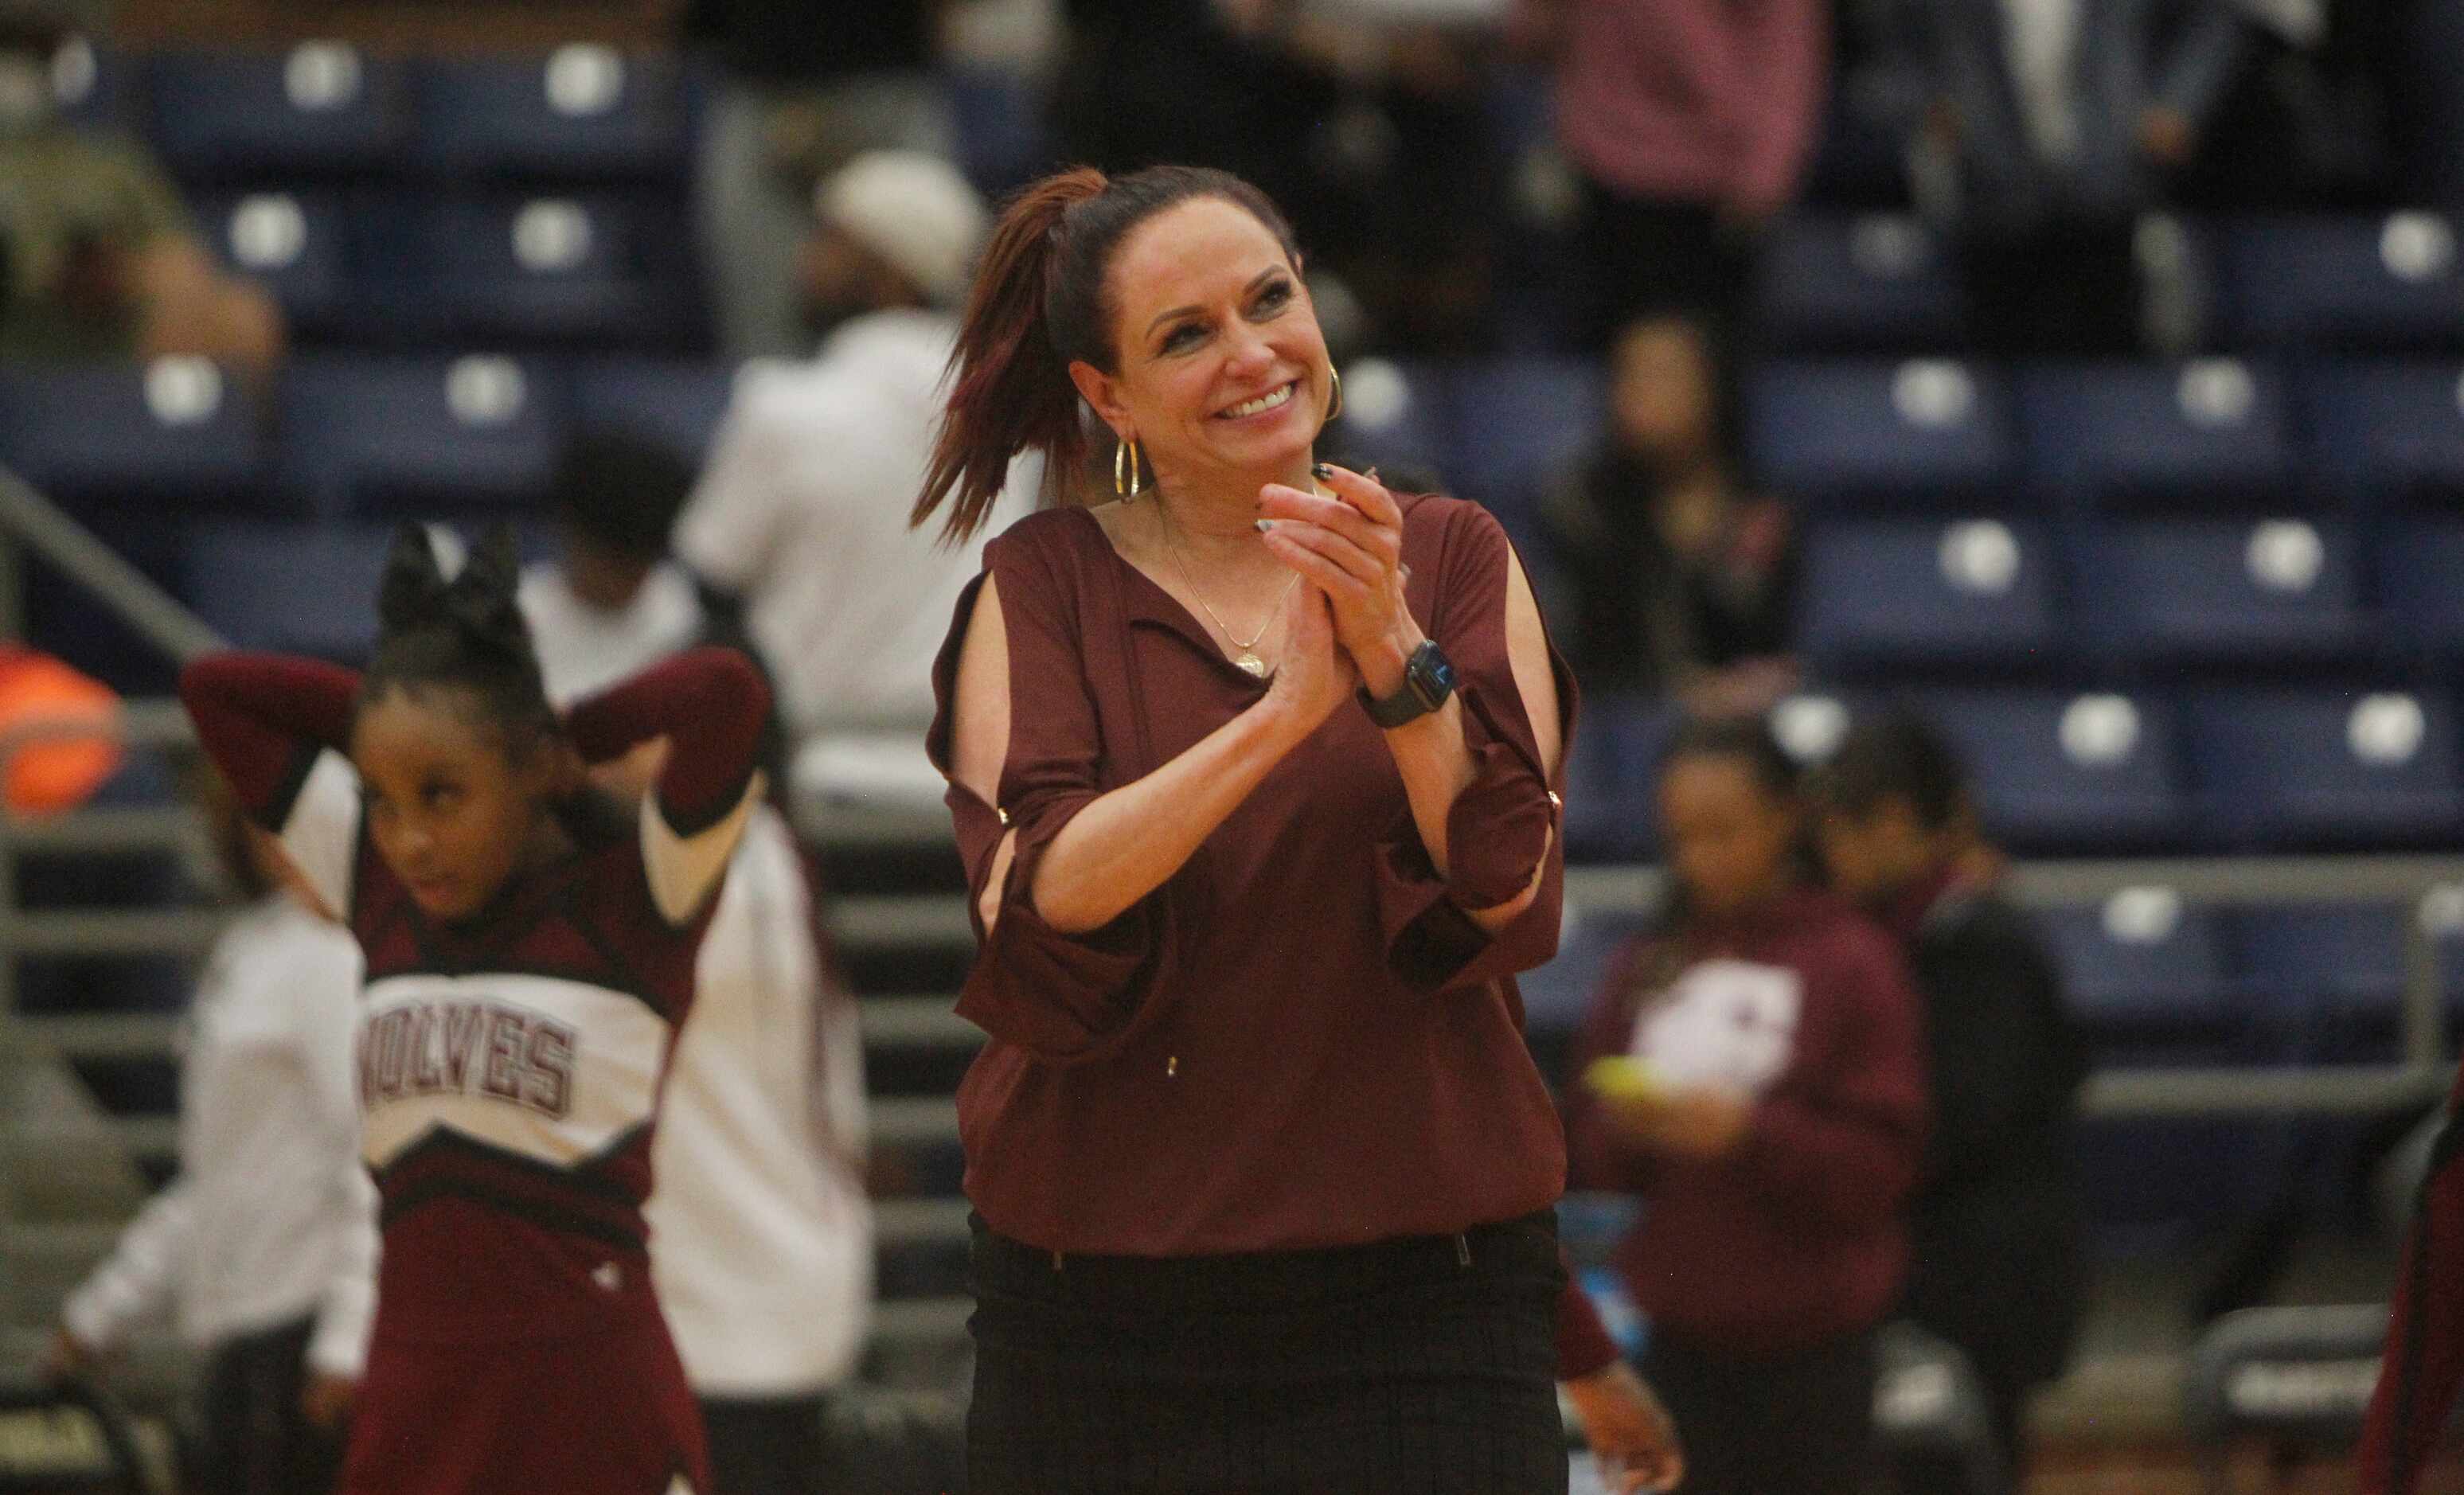 Mansfield Timberview head coach Kit Kyle-Martin beams as she acknowledges applause from fans...